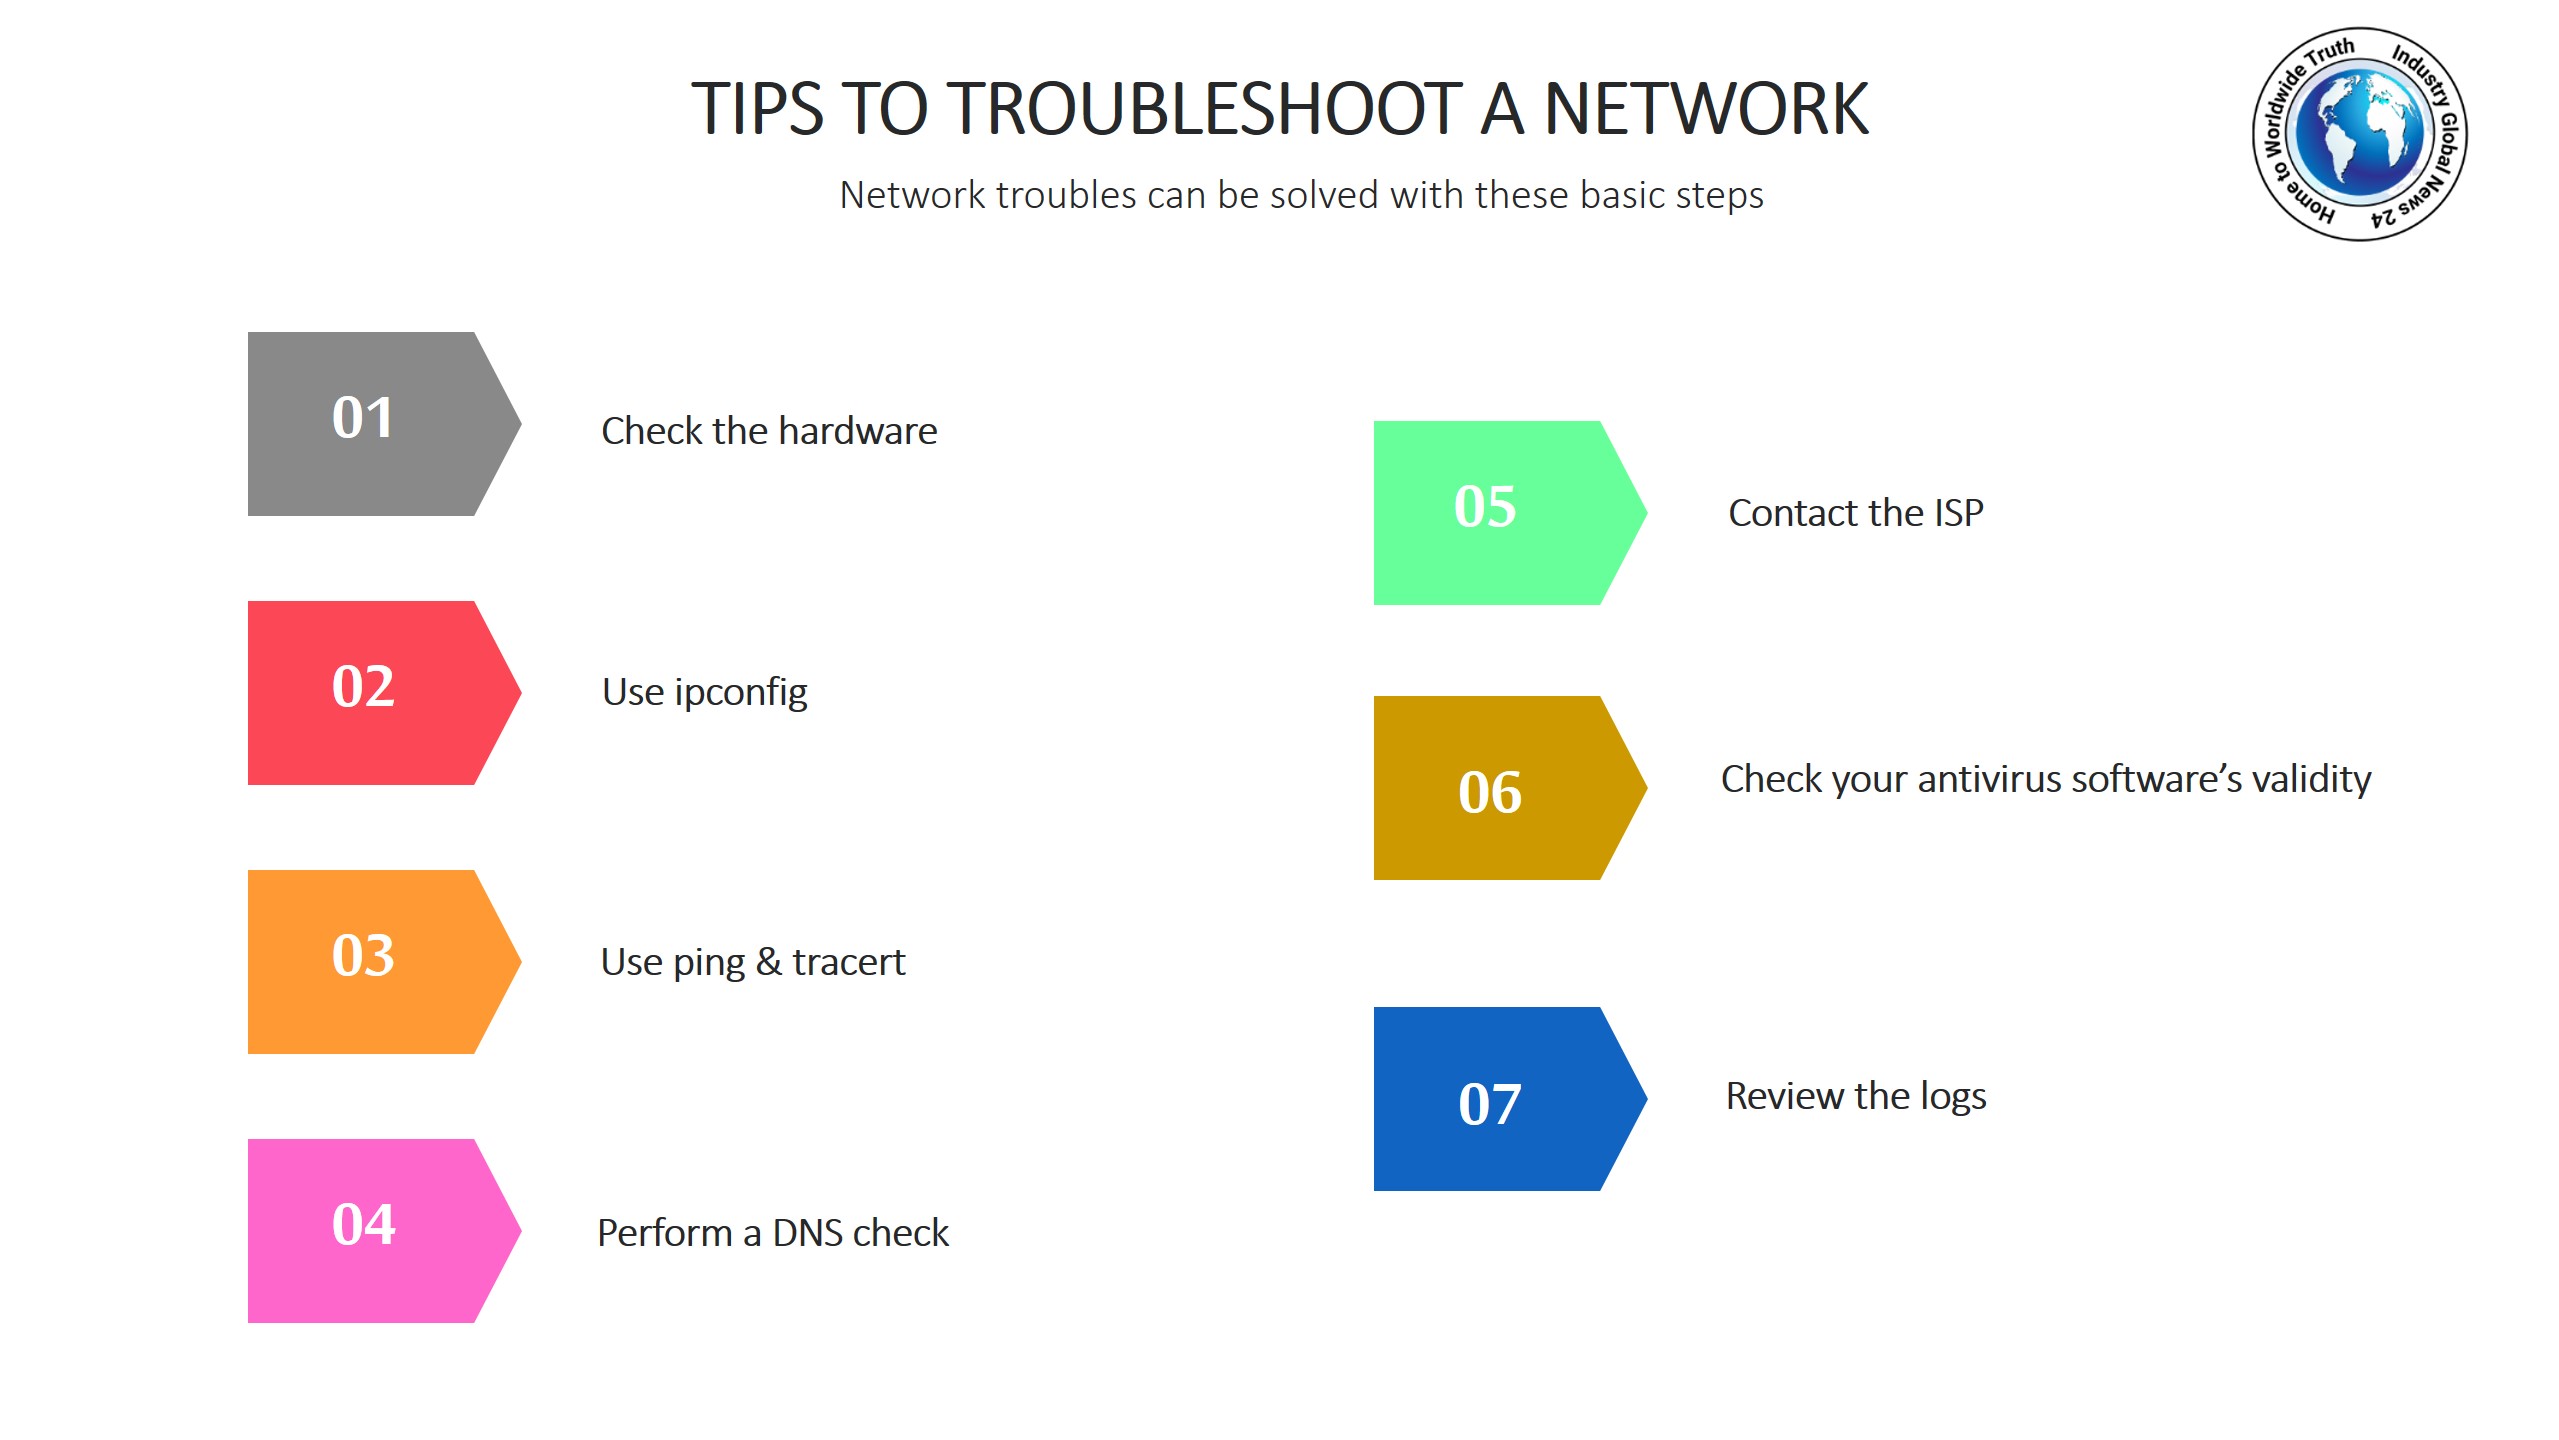 Tips to troubleshoot a network